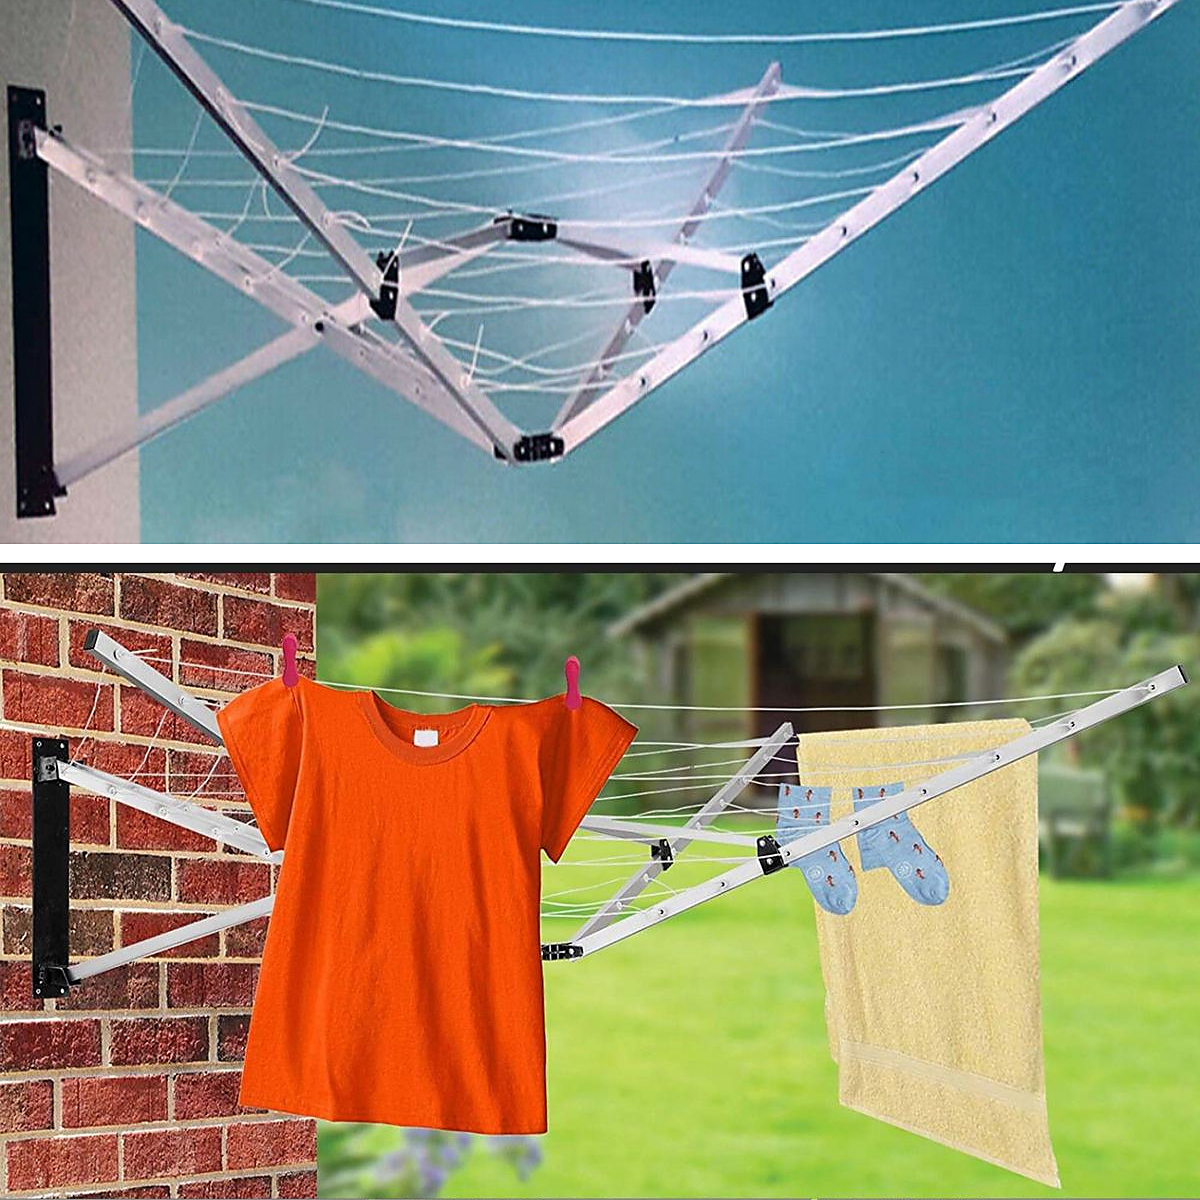 Wall Mounted 5 Arm 26m Clothes Airer Folding Concertina Cloth